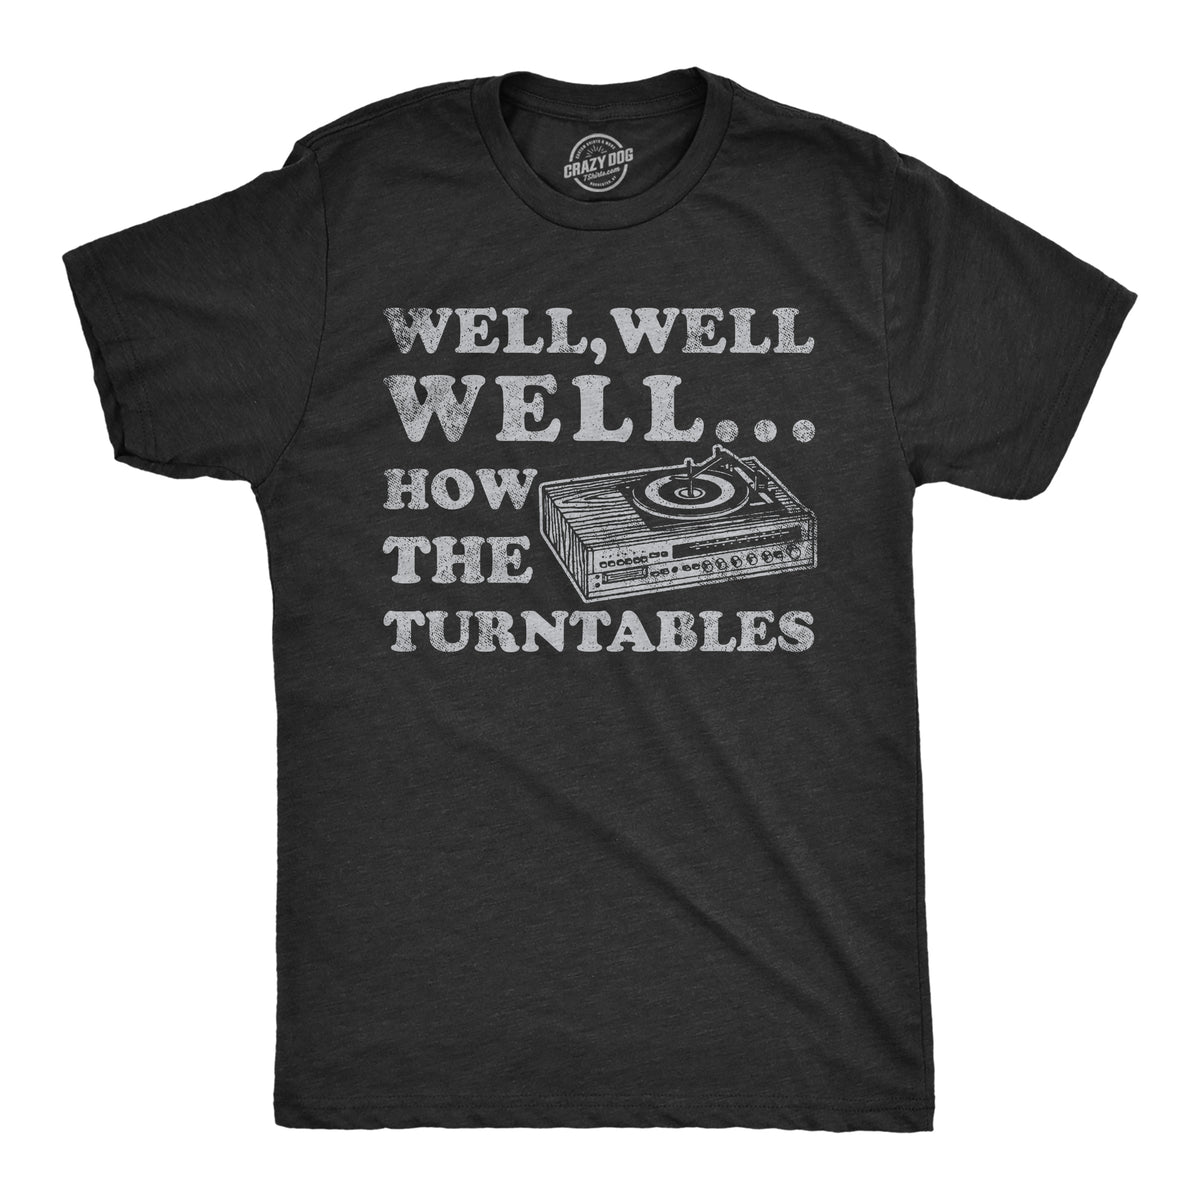 Funny Heather Black - How The Turntables Well Well Well How The Turntables Mens T Shirt Nerdy Music sarcastic Tee